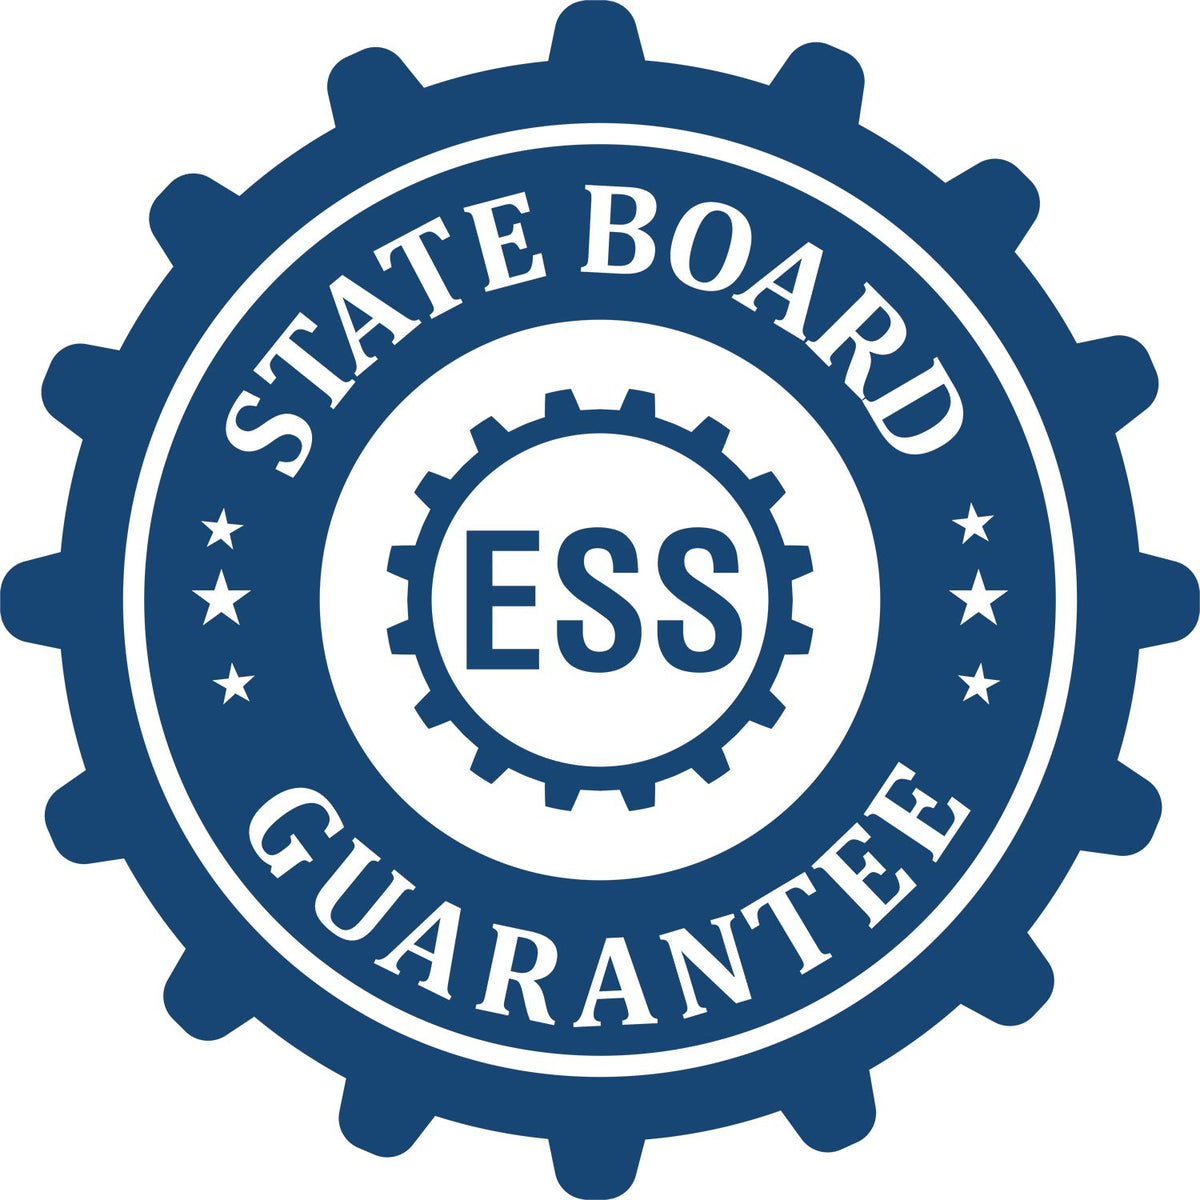 An emblem in a gear shape illustrating a state board guarantee for the Hybrid Oklahoma Architect Seal